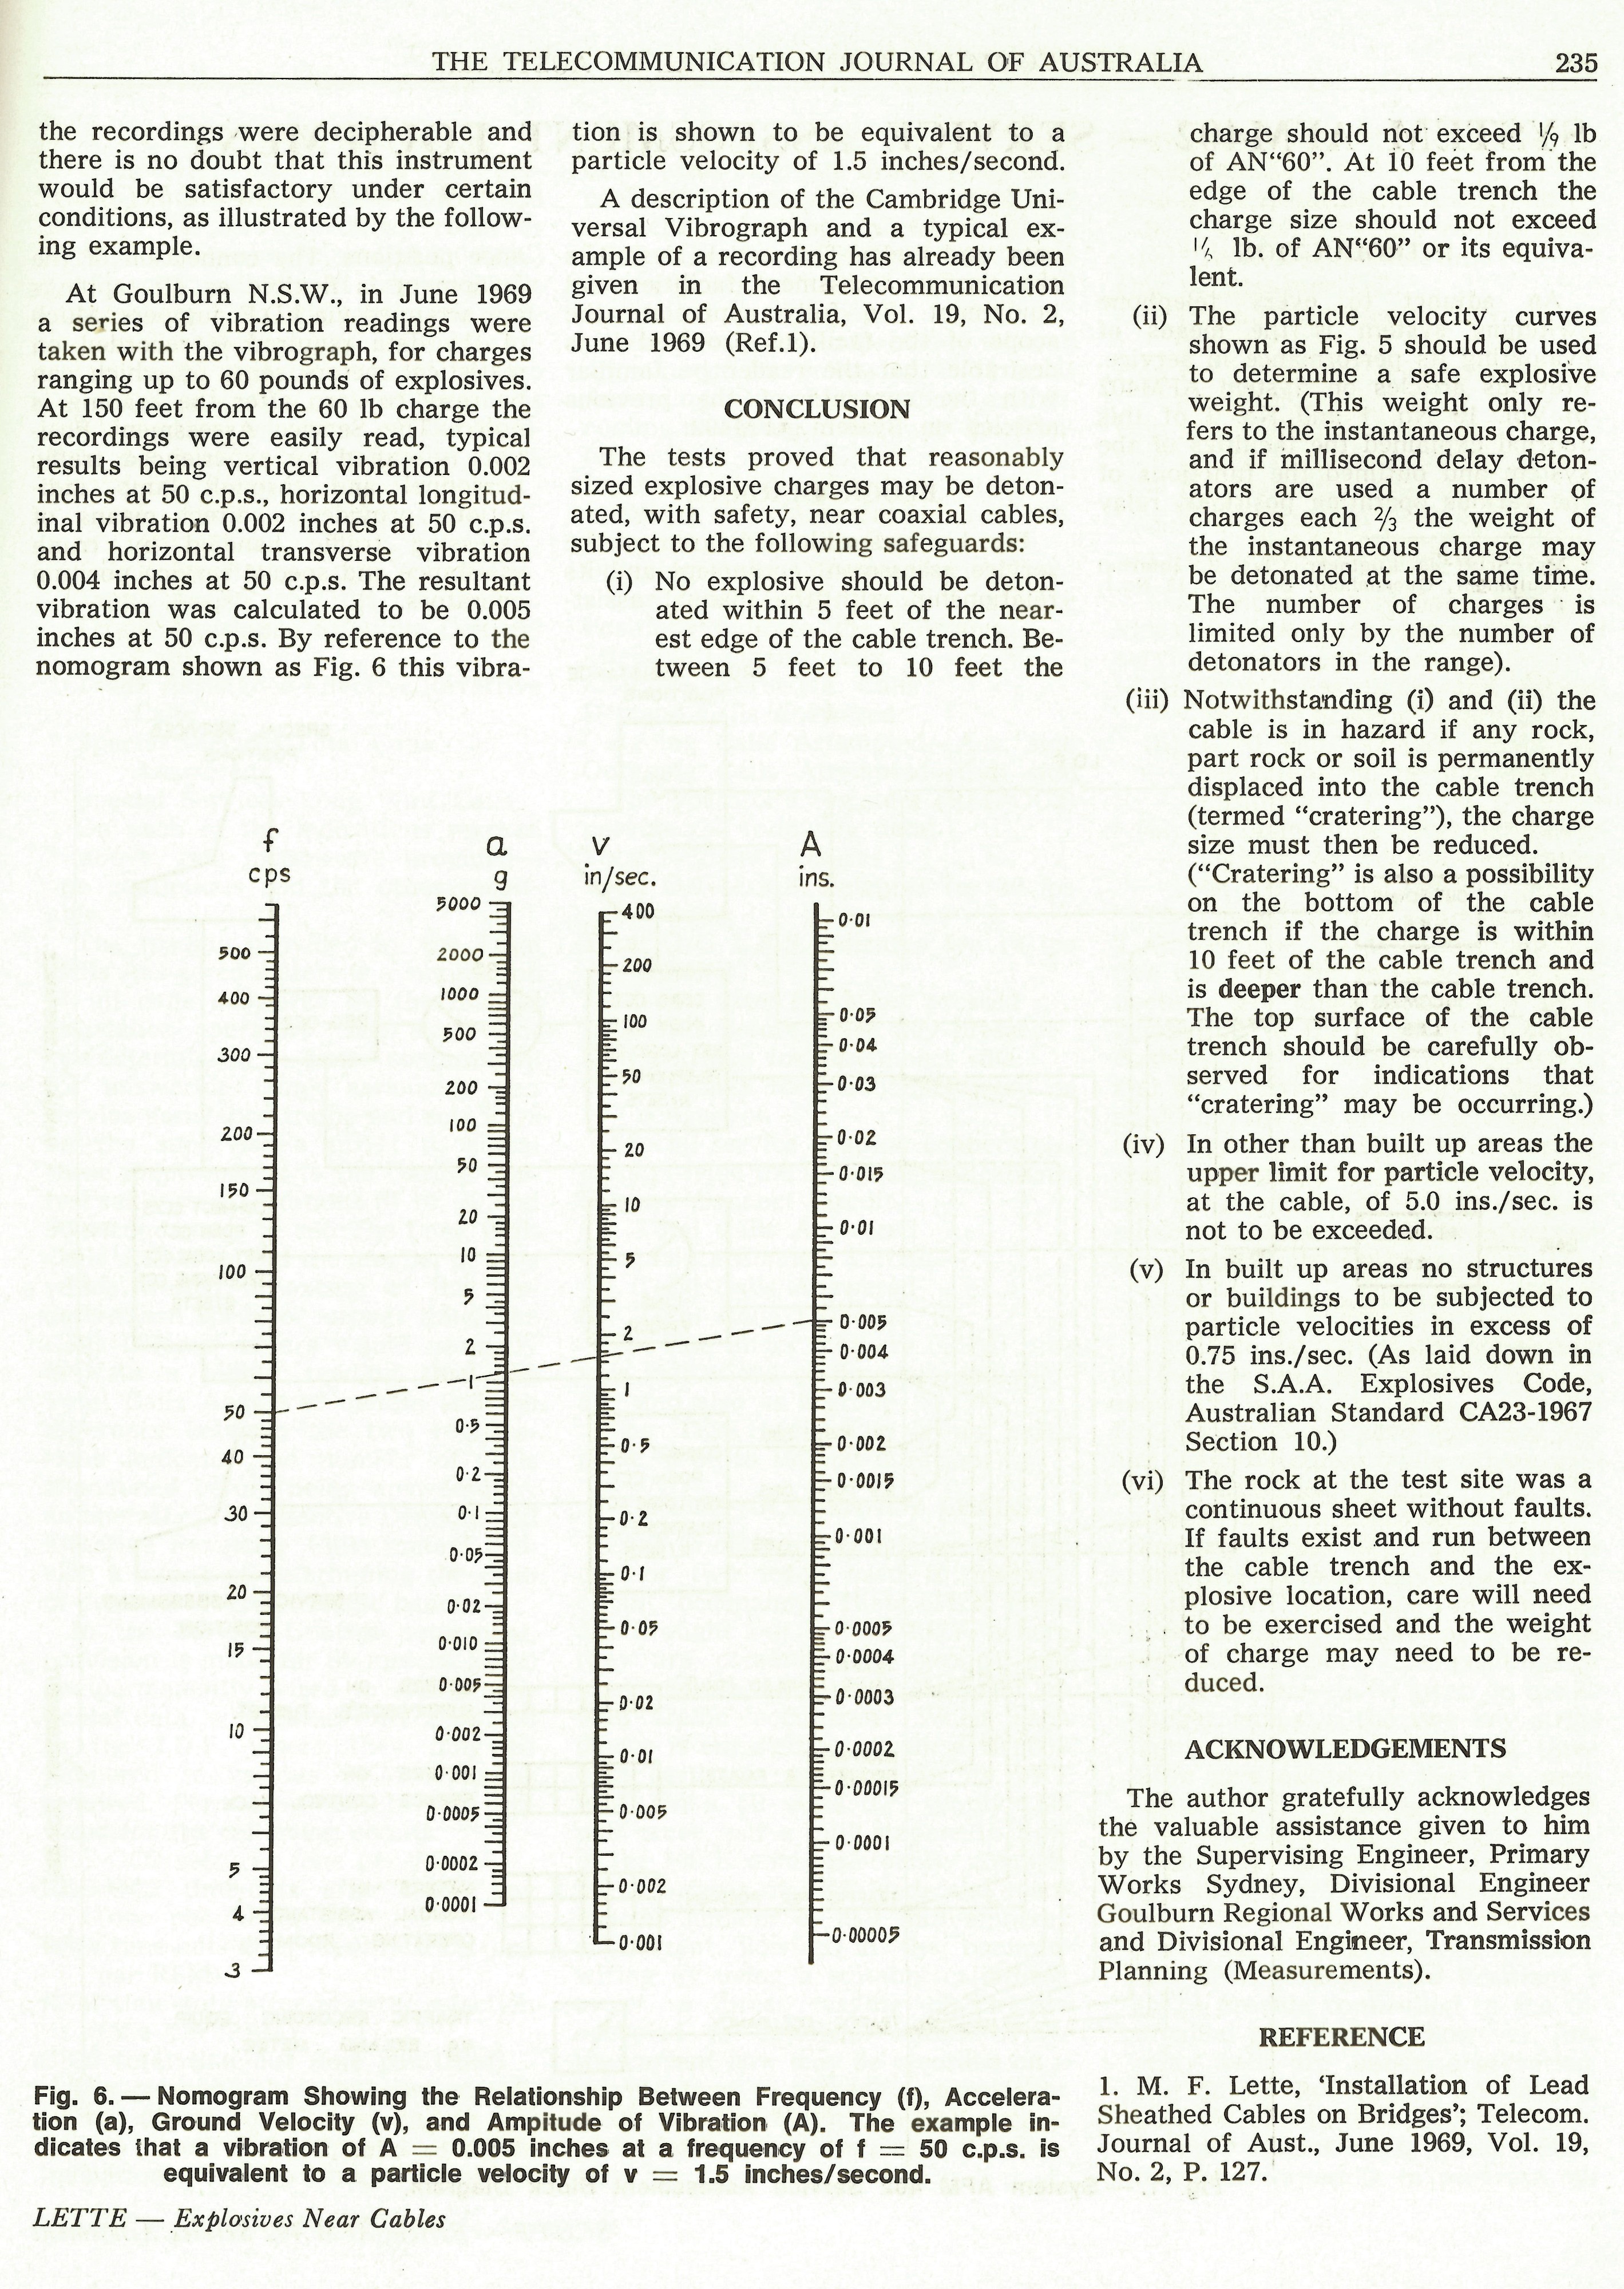 Explosives Near Cables, Page 235